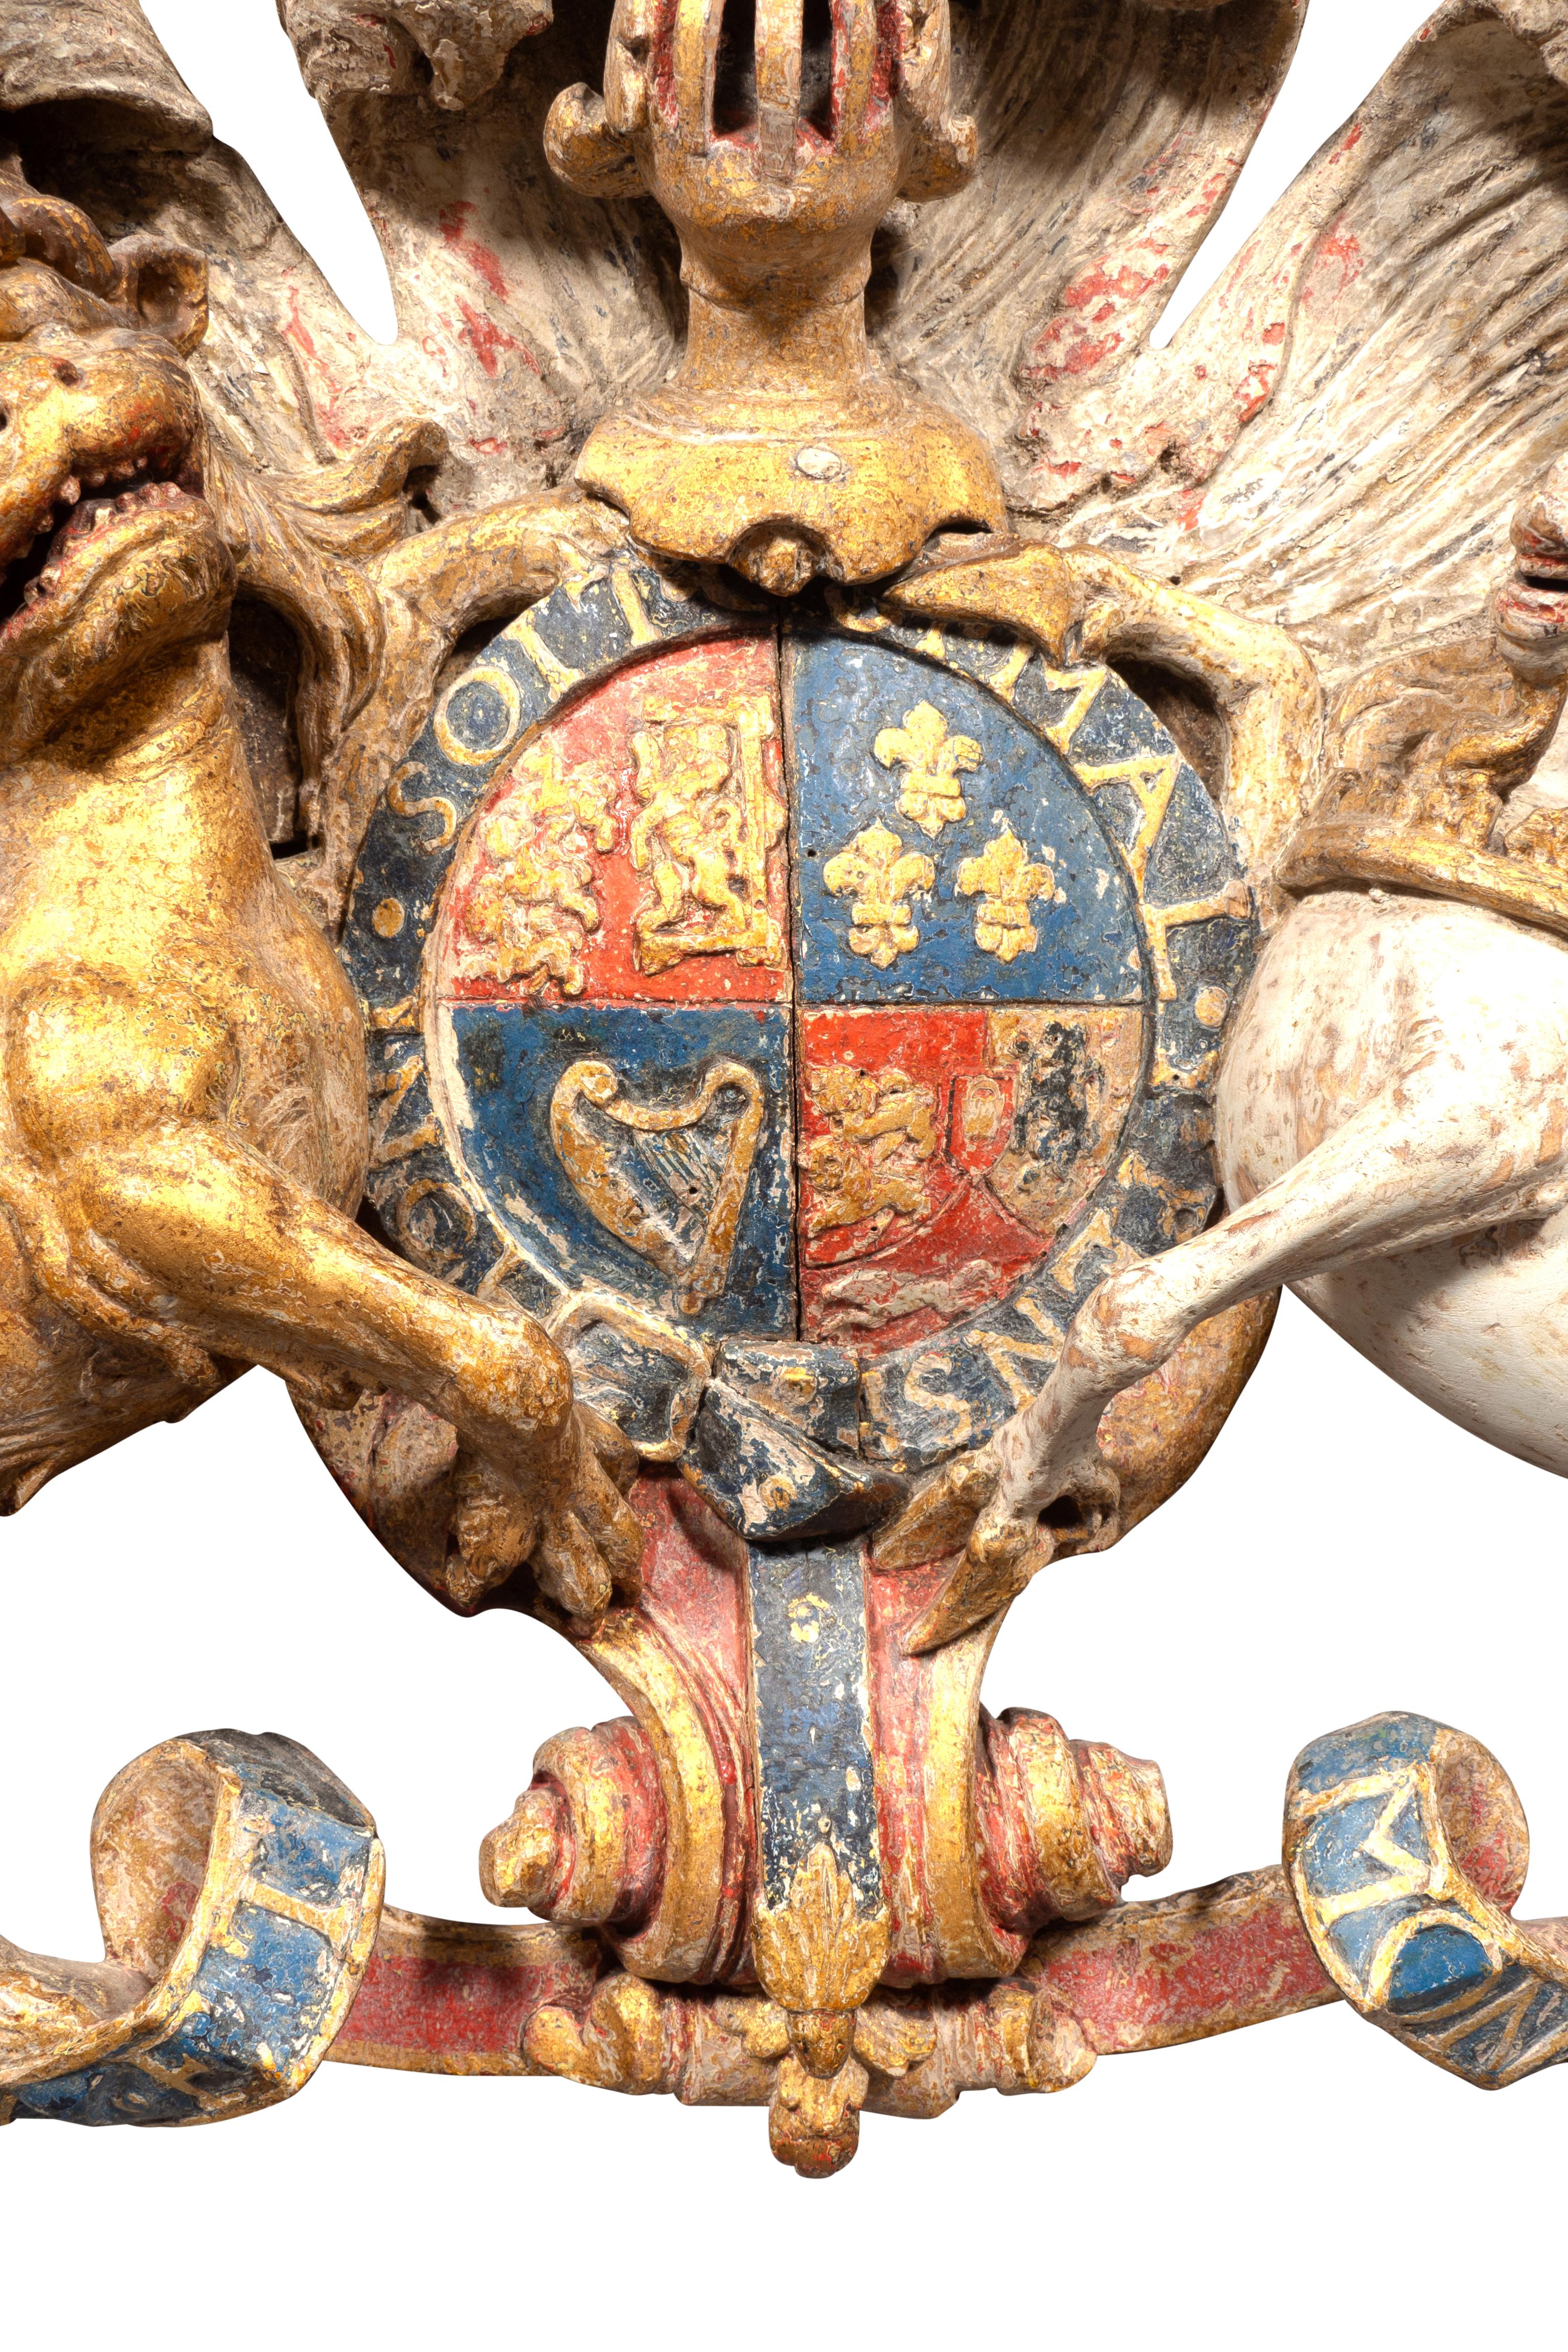 Gilt George III Painted Coat Of Arms Representing The Kingdom Of Great Britain